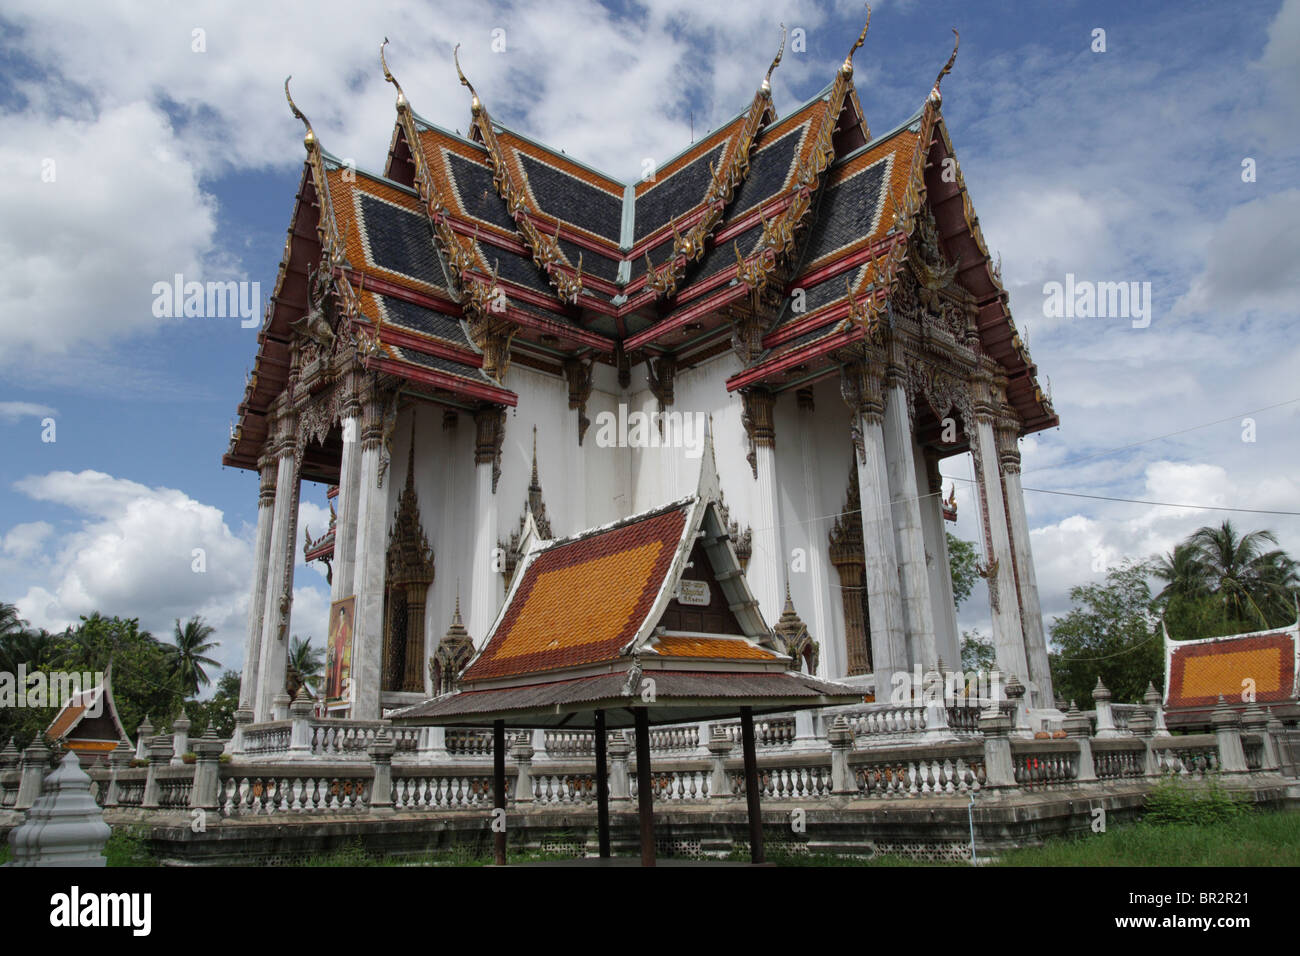 Temple building in Thailand Stock Photo